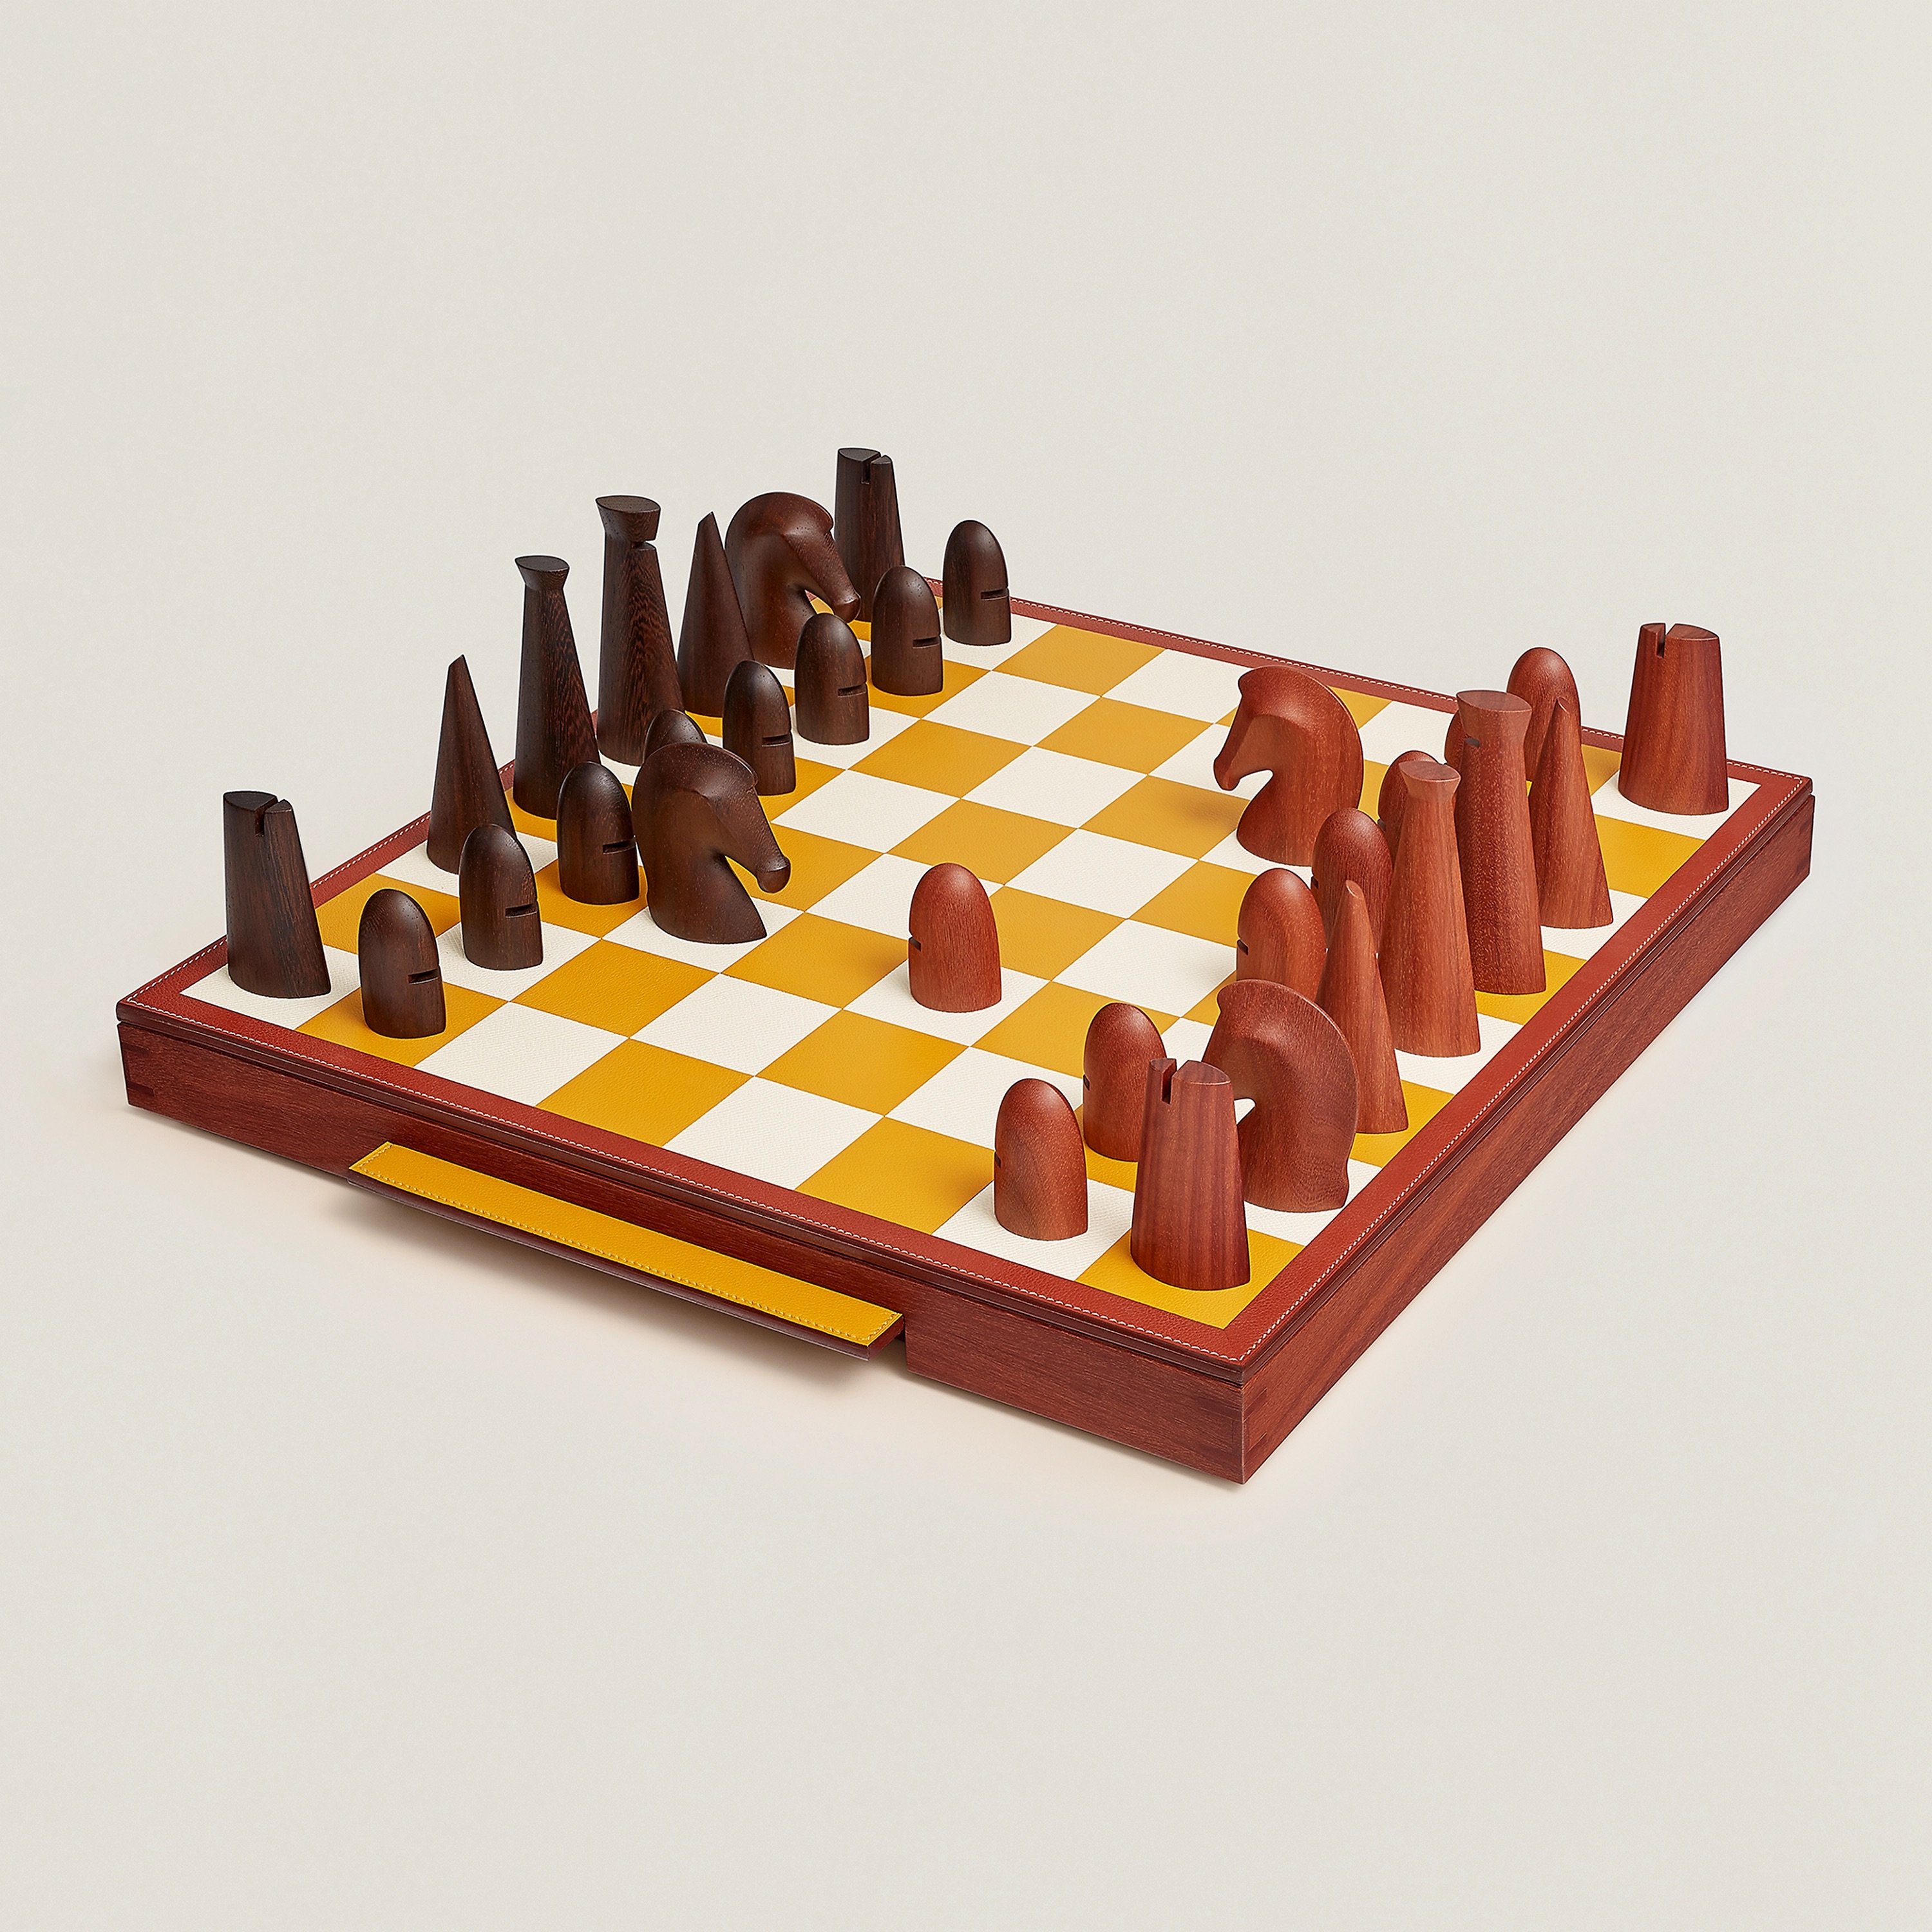 Samarcande Chess set in sapodilla wood and leather marquetry, hand sculpted pawns in solid cassia and sapodilla wood with Clou de Selle engraved stainless steel weights. Handles in saddle-stitched Evercolor calfskin. Leather marquetry. $15,700. Photo via Hermès.com